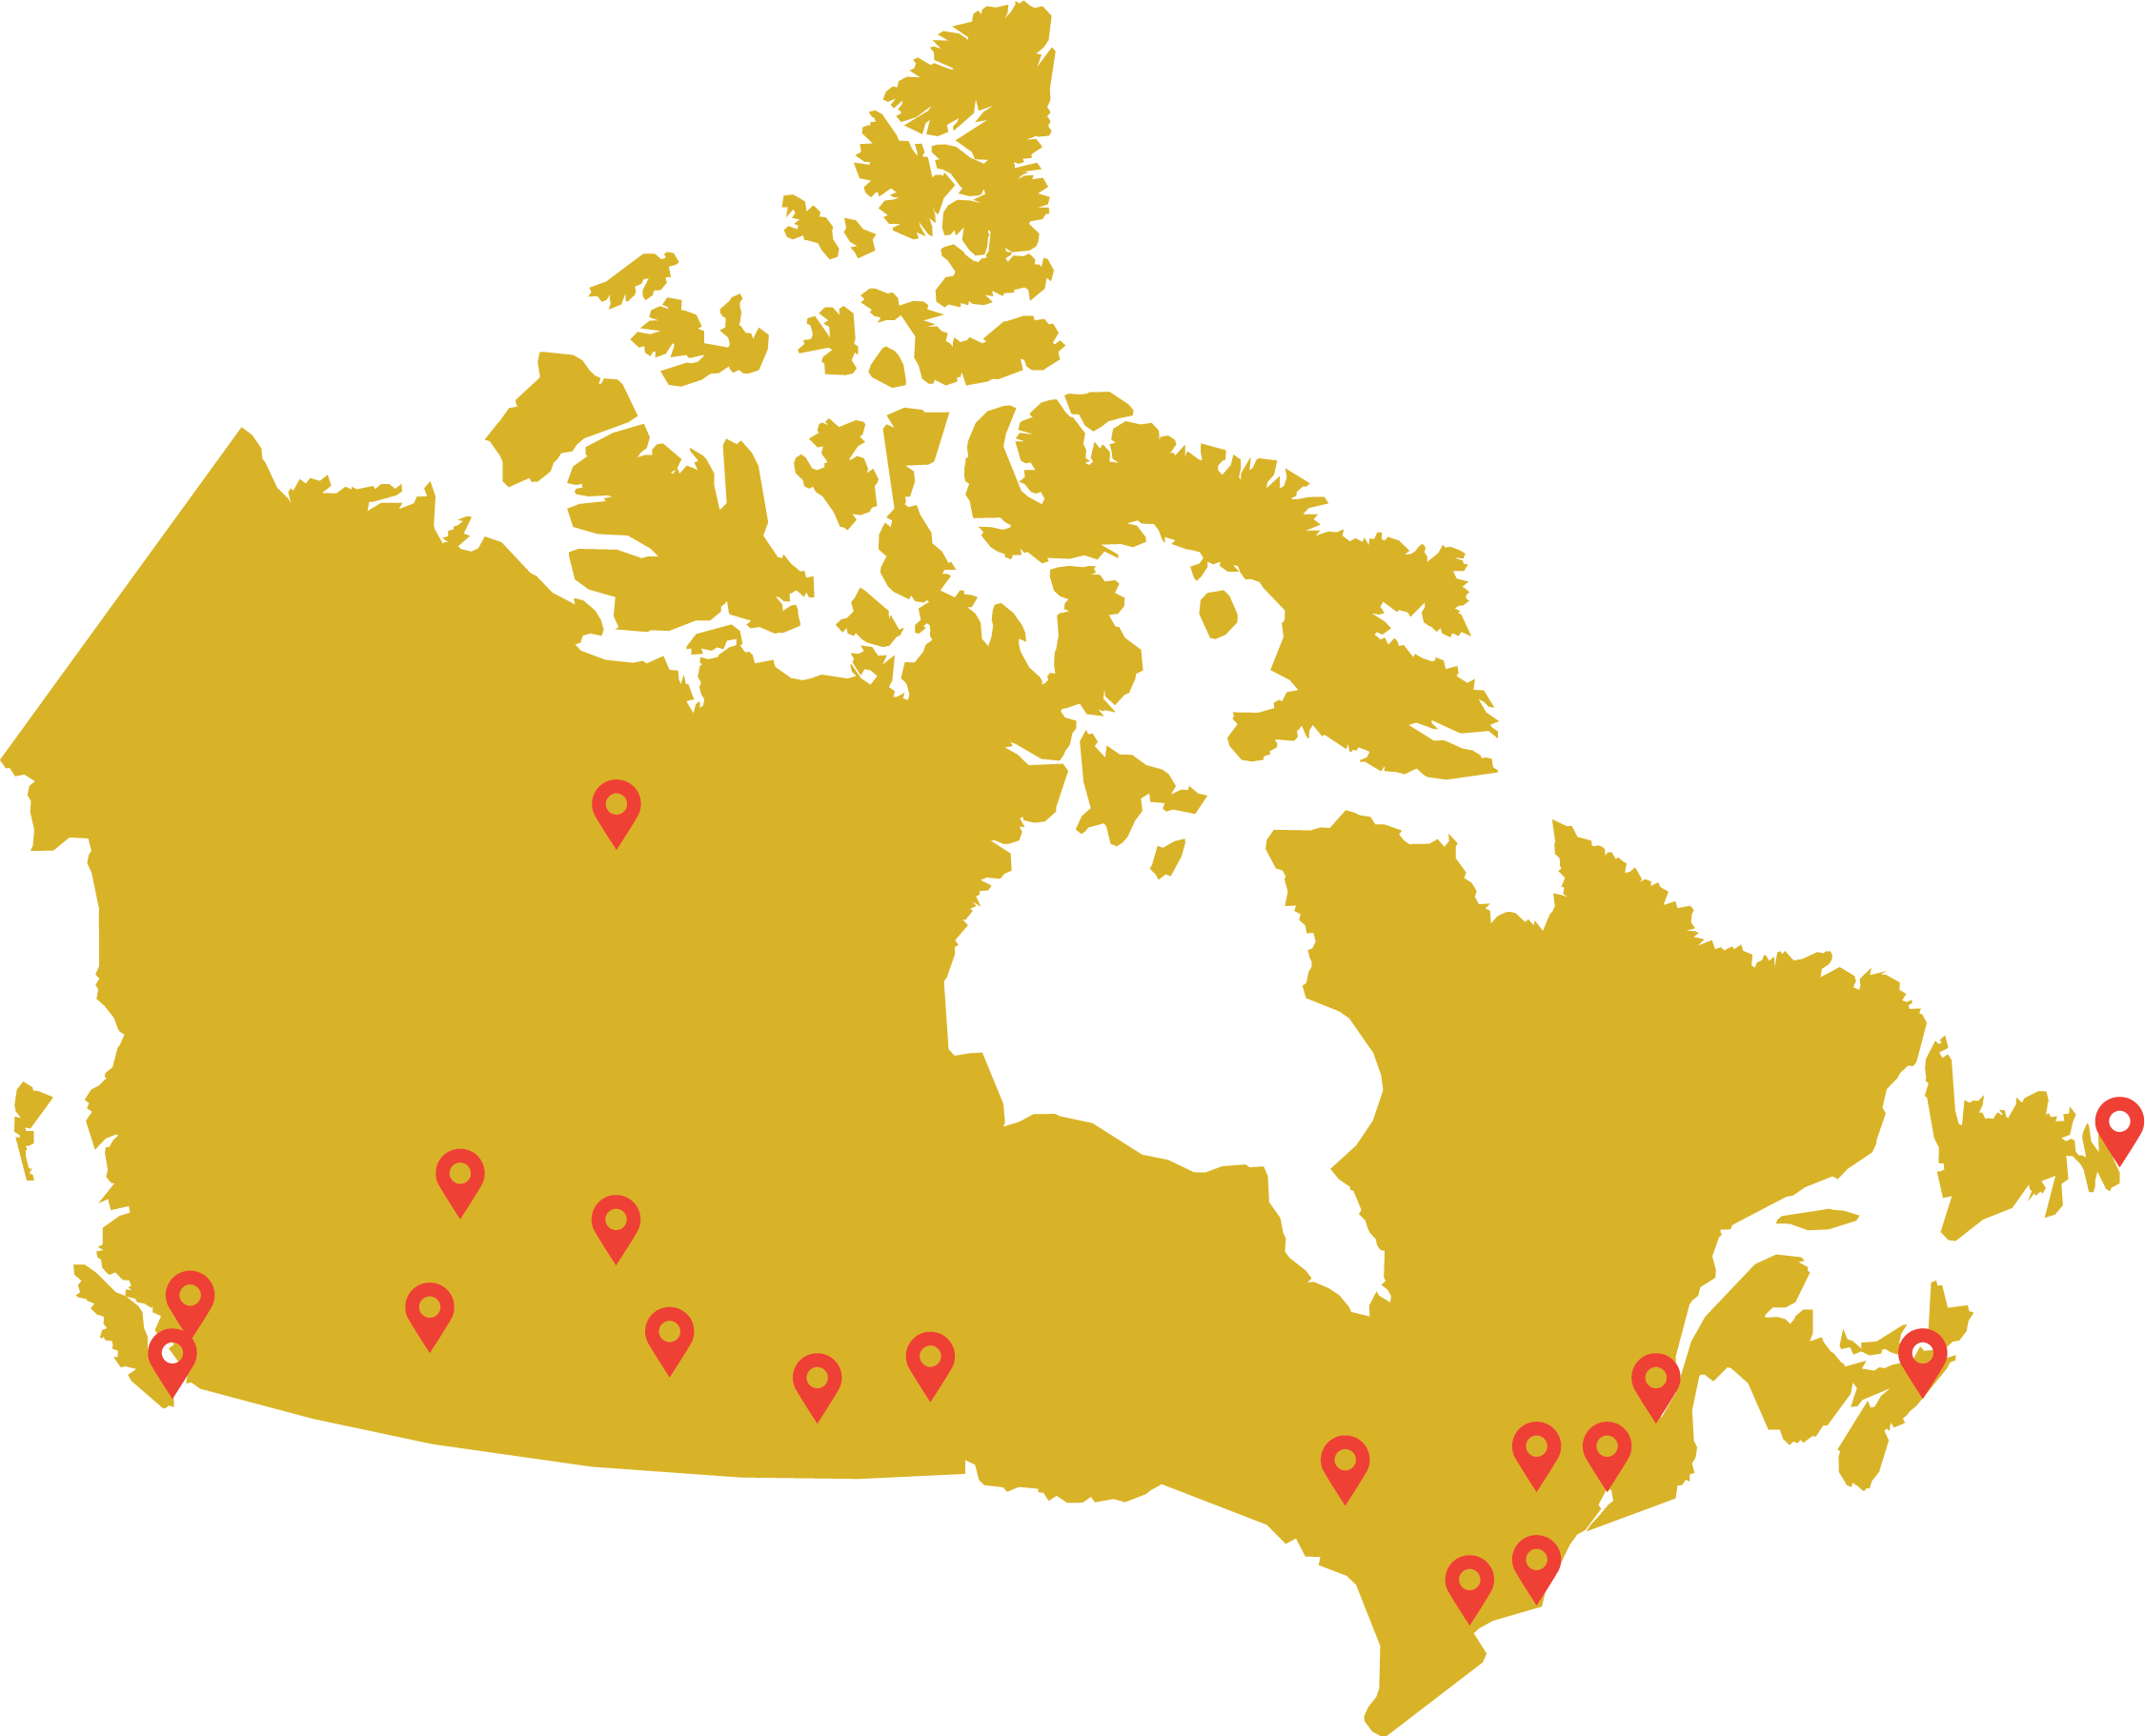 Map of Canada with pins to represent the locations where OPO held its outreach activities in 2022-23.